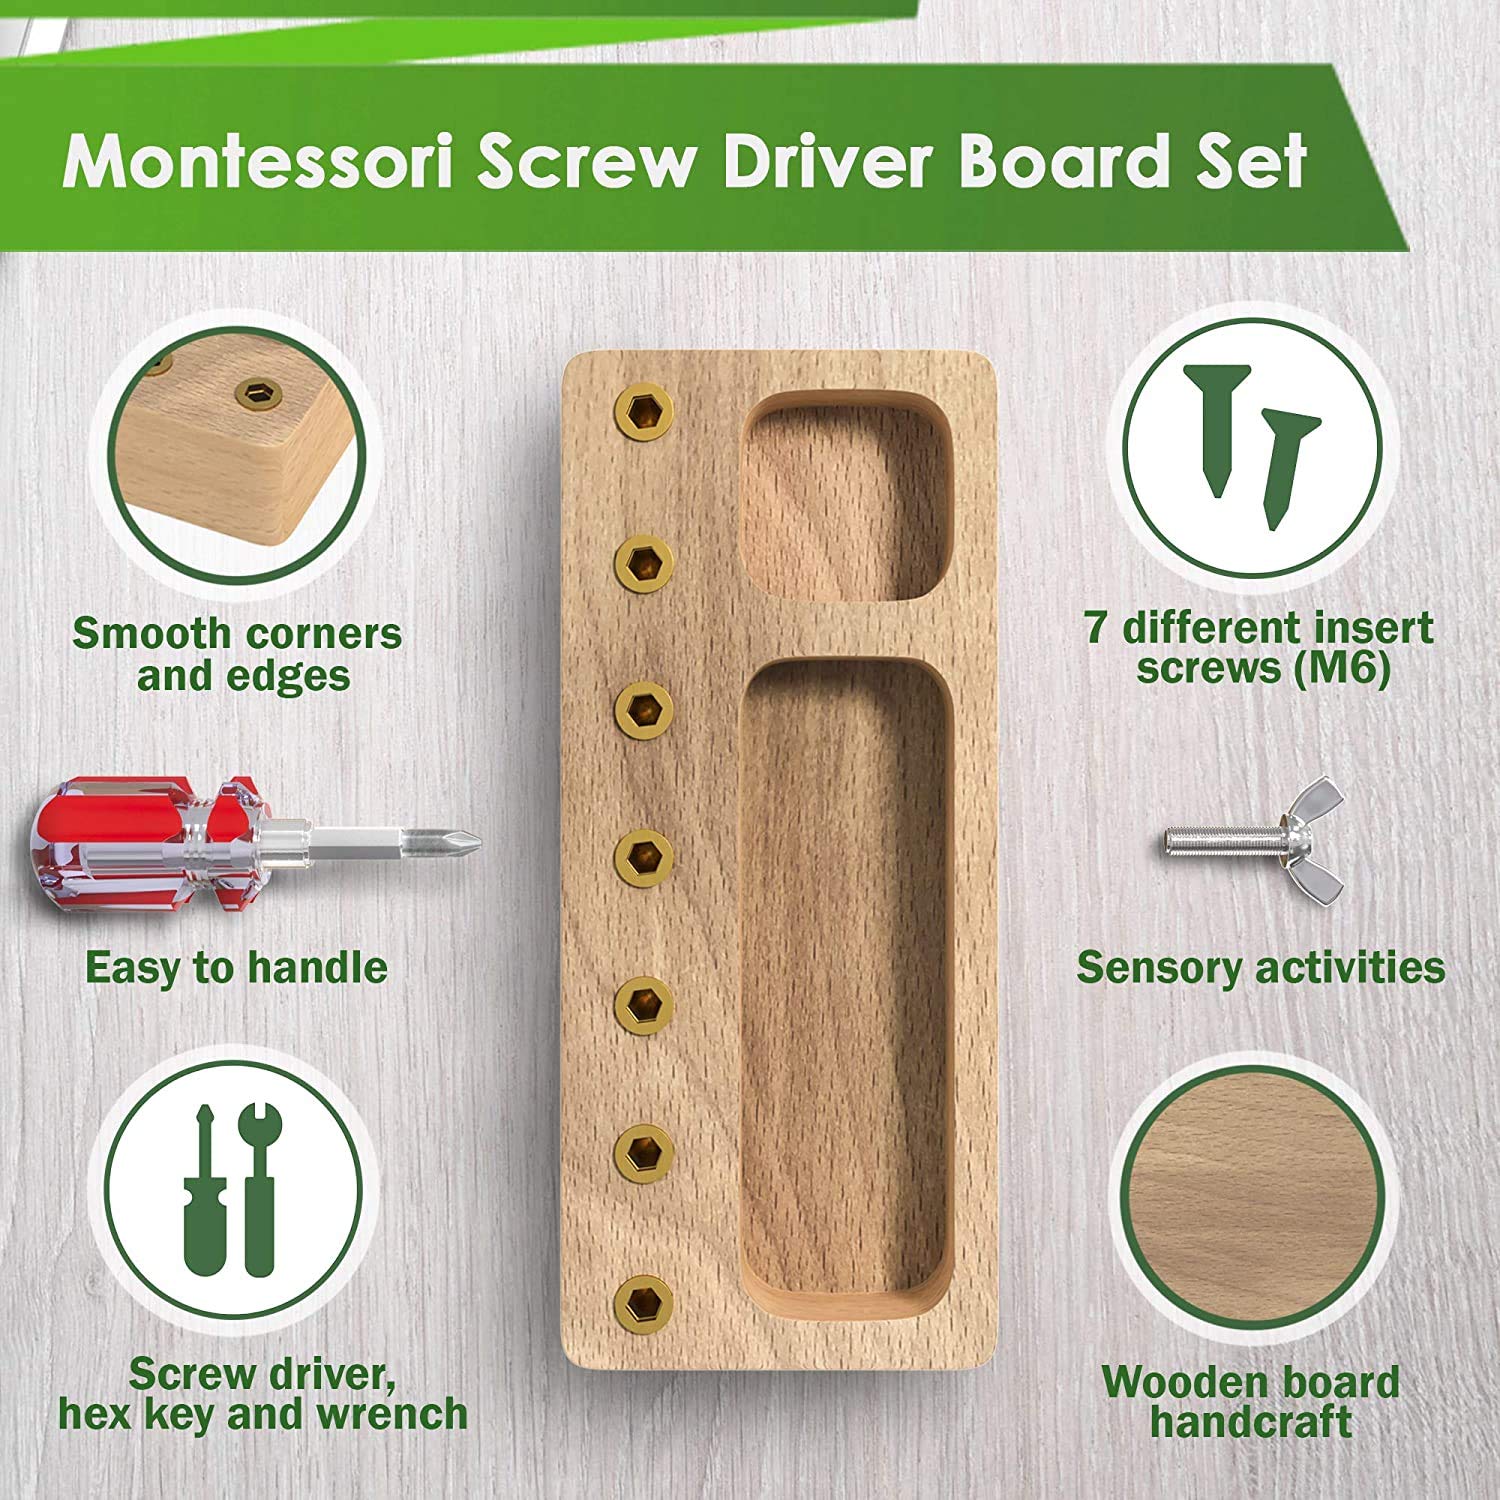 Panda Brothers Montessori Screw Driver Board for Kids - Basic Skills Educational Sensory Toy, Learning Wooden Montessori Materials for 3 4 5 Year Old Kids and Toddlers, Preschool, Classroom STEM Toy